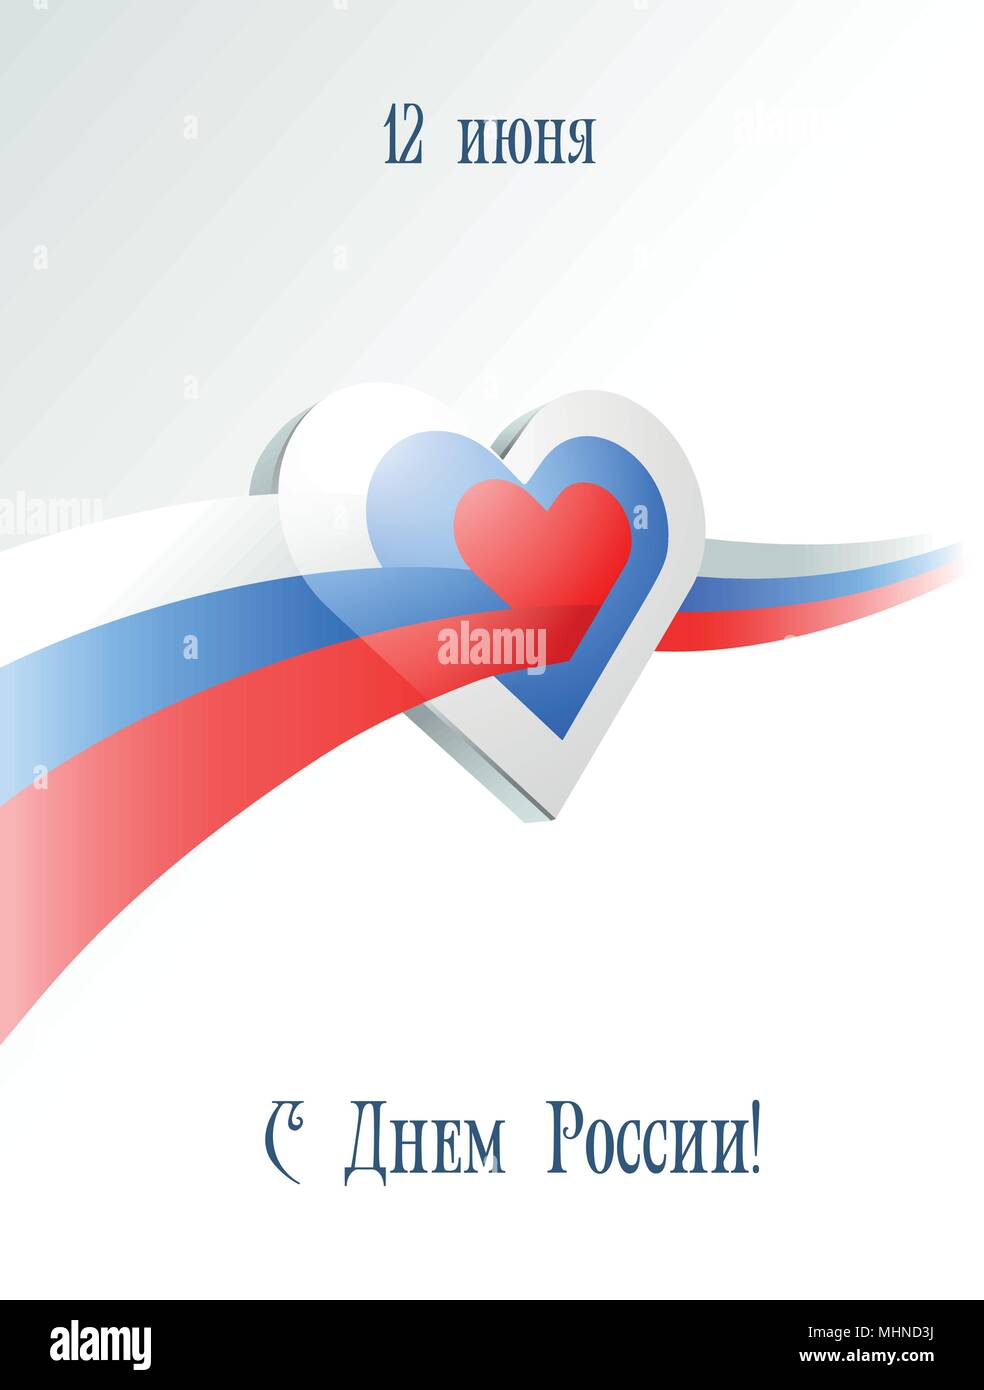 June 12. Happy Russia Day. Greeting card with waving russian flag crosses heart. Vector illustration. Stock Vector